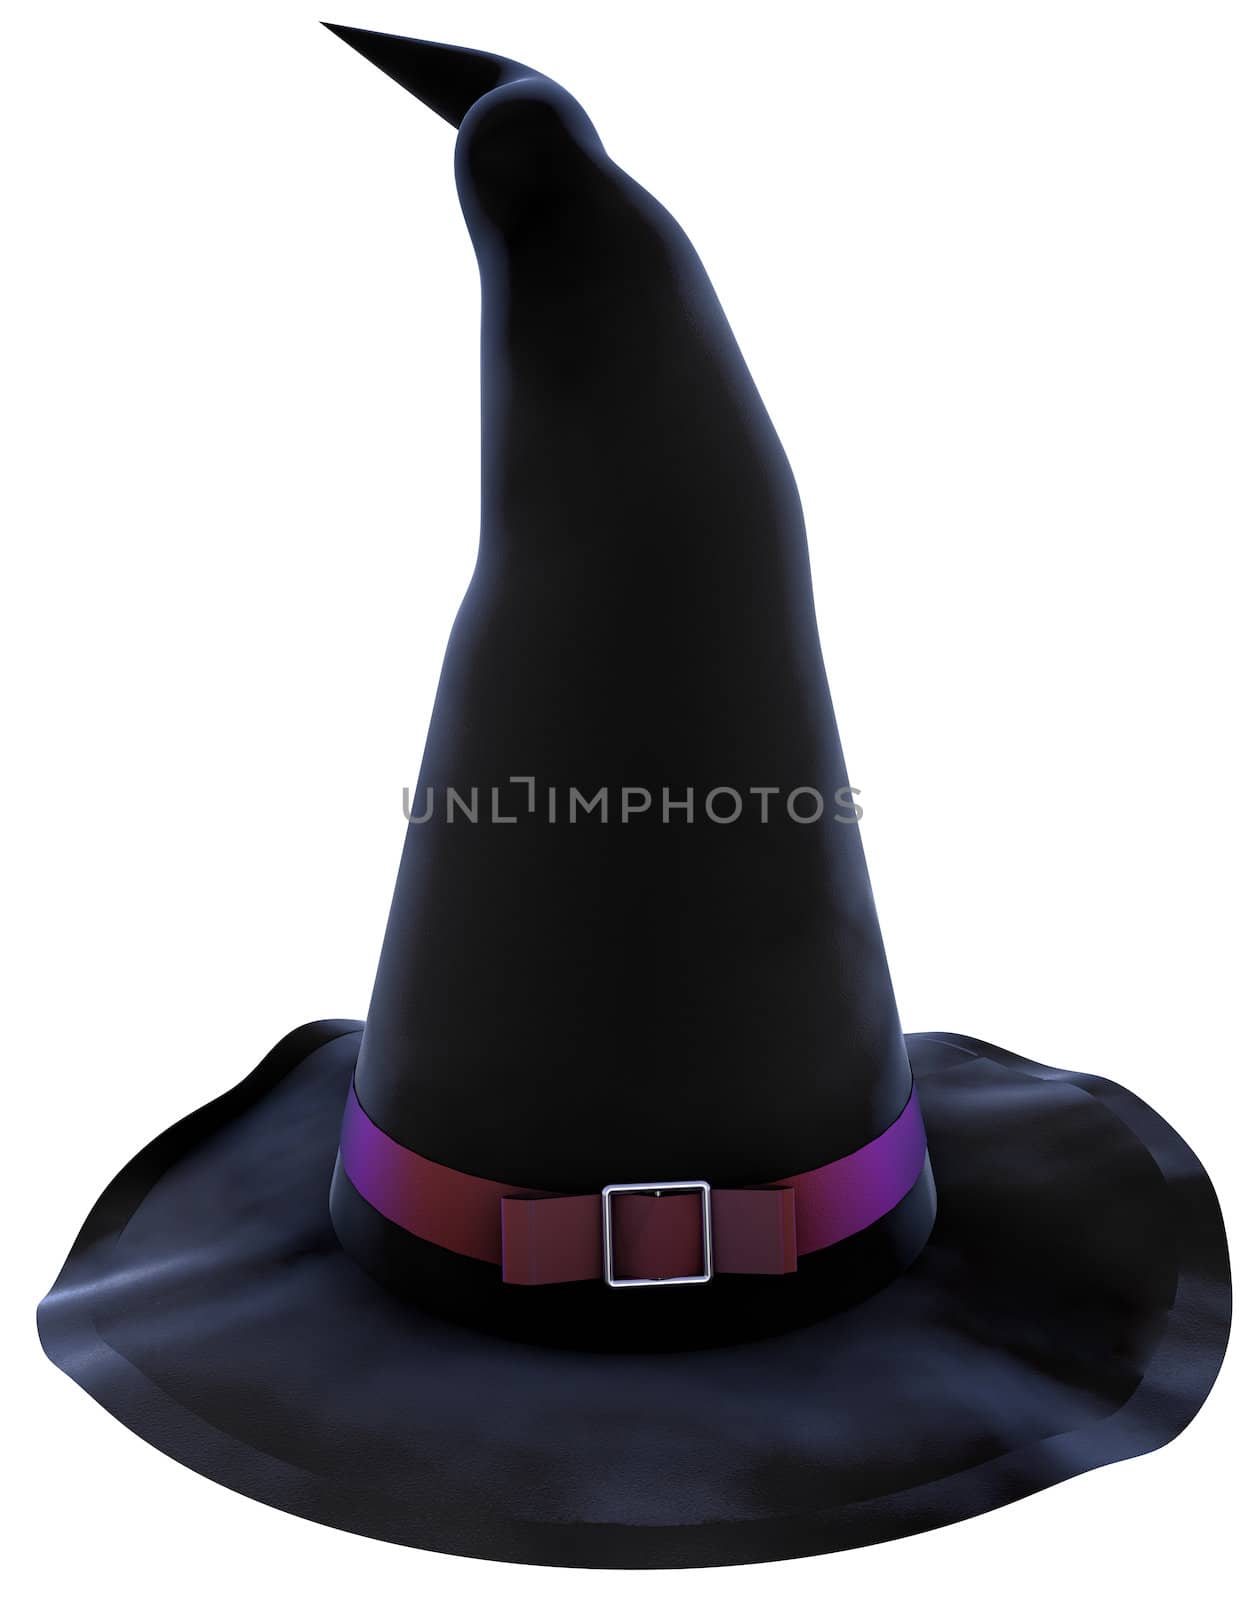 witch hat done in 3d isolated on white with clipping path